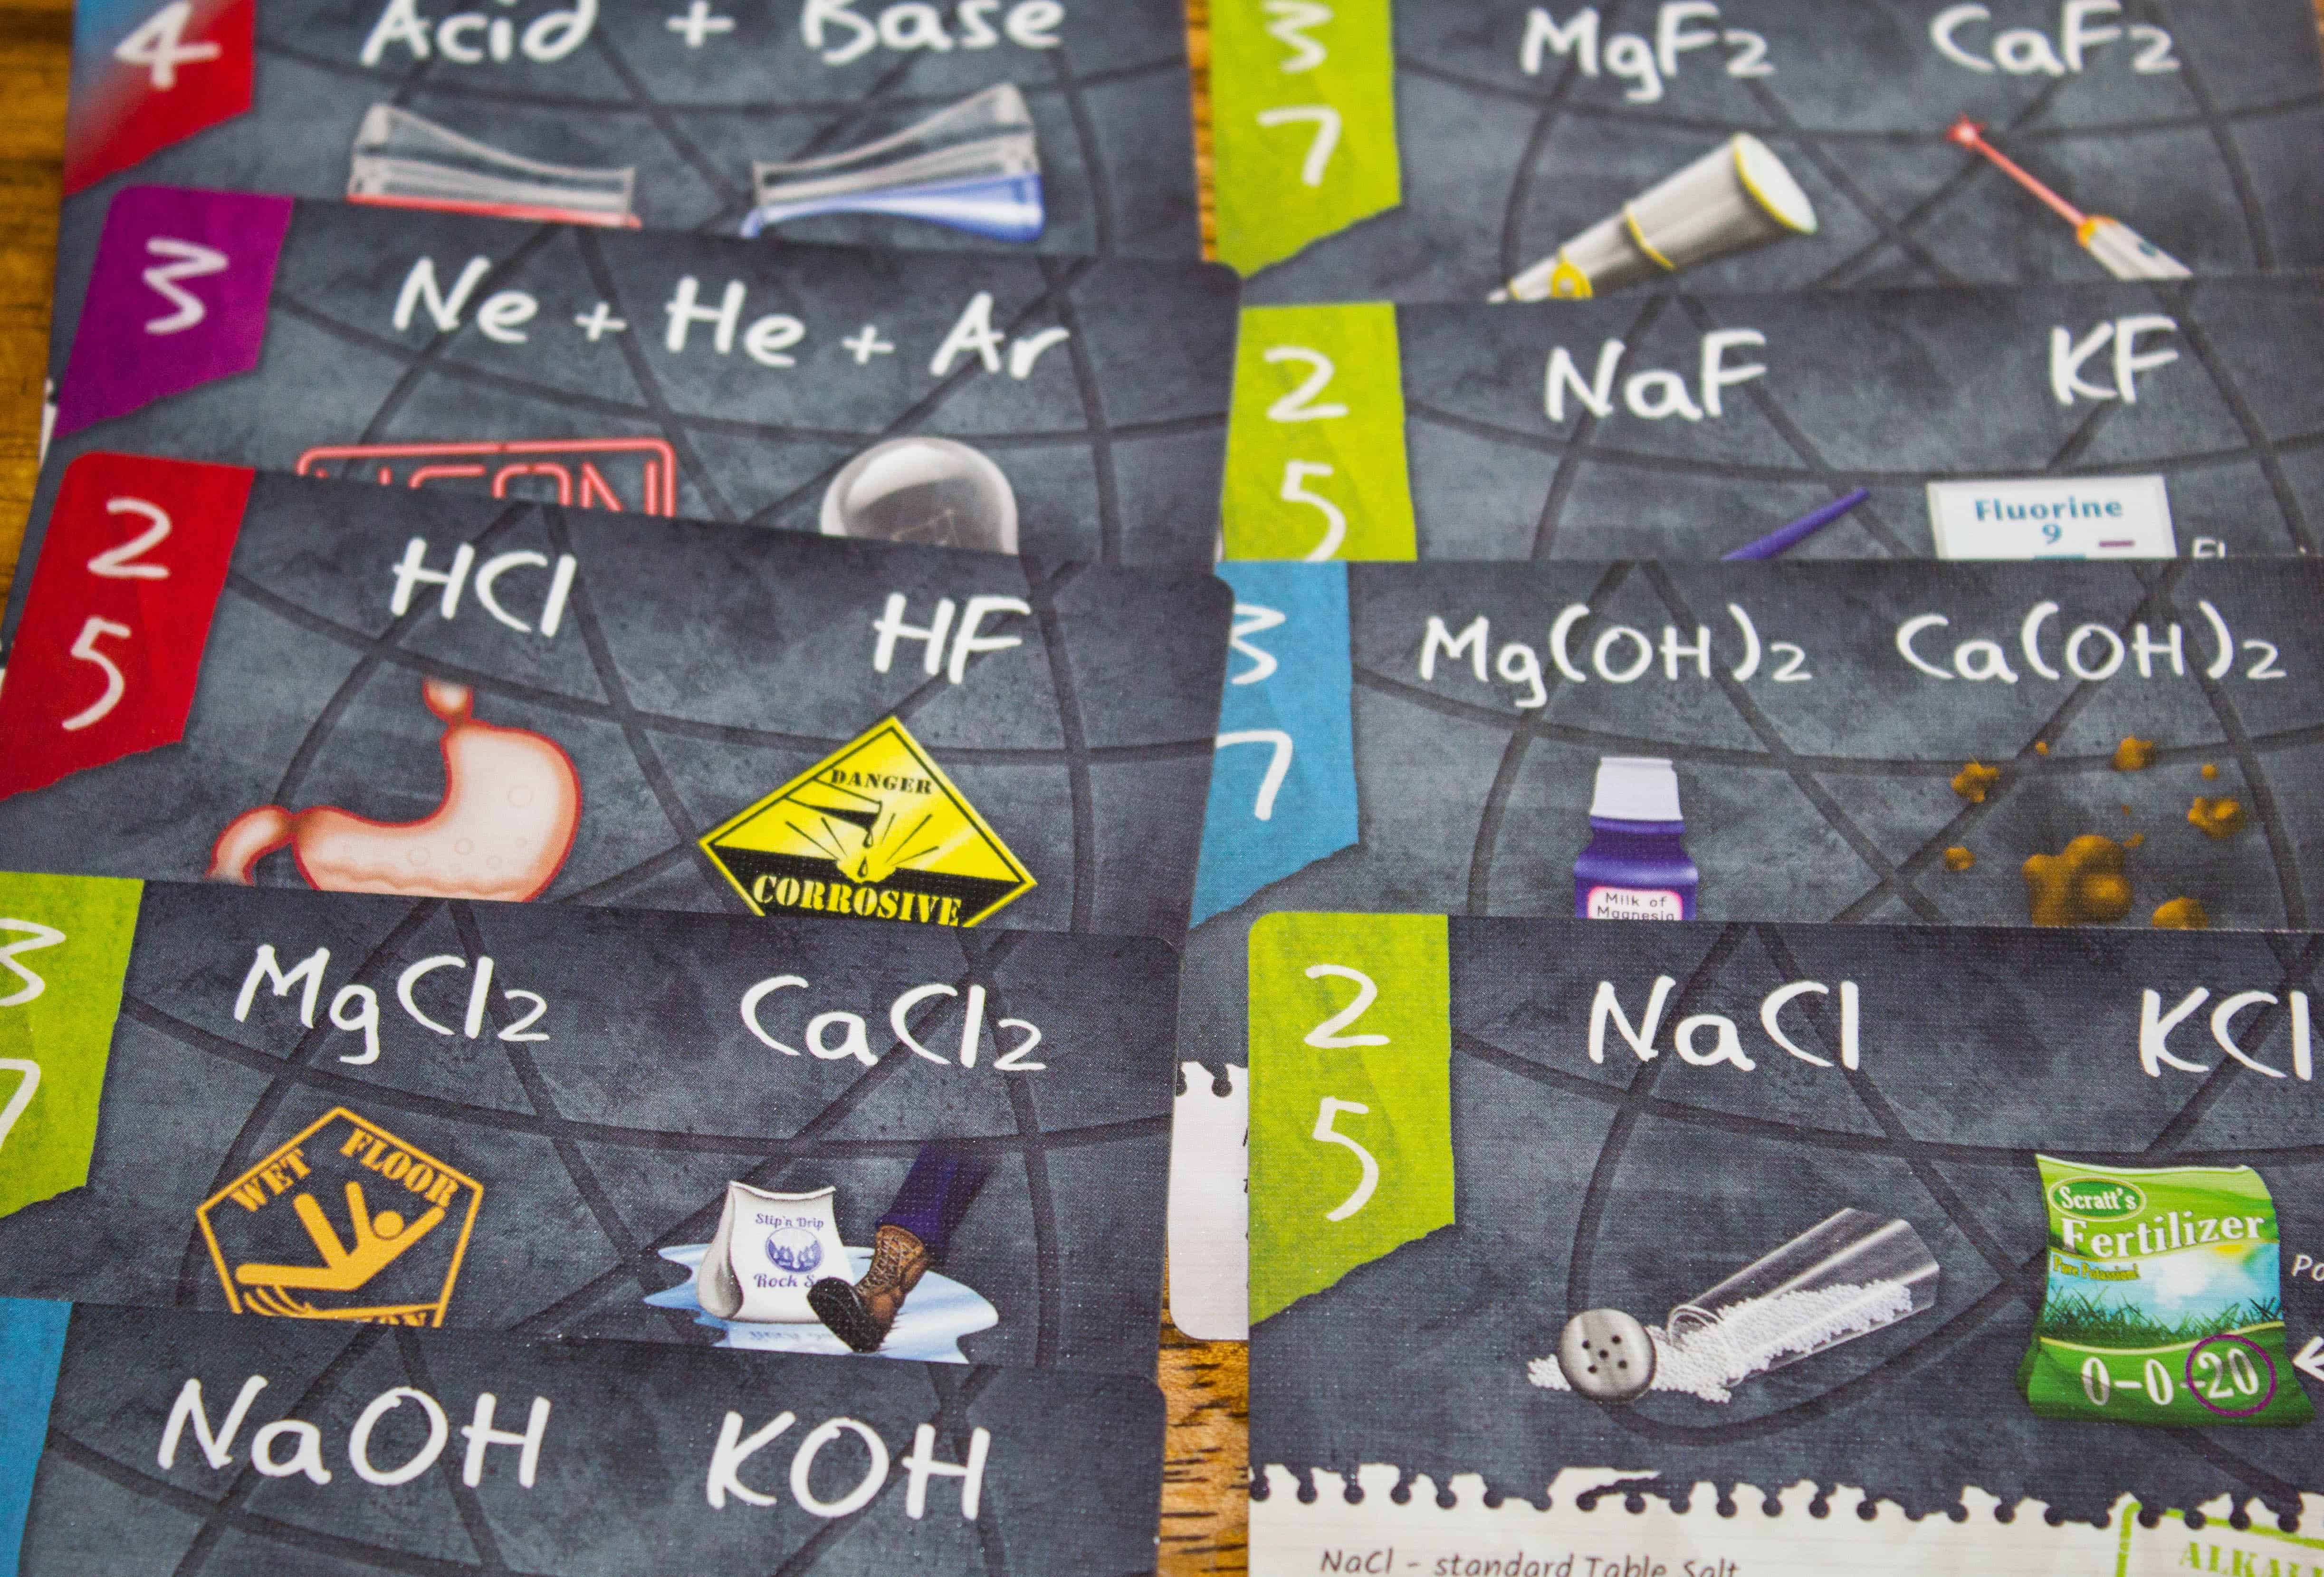 Introduce new ideas using these top 20 science board games!